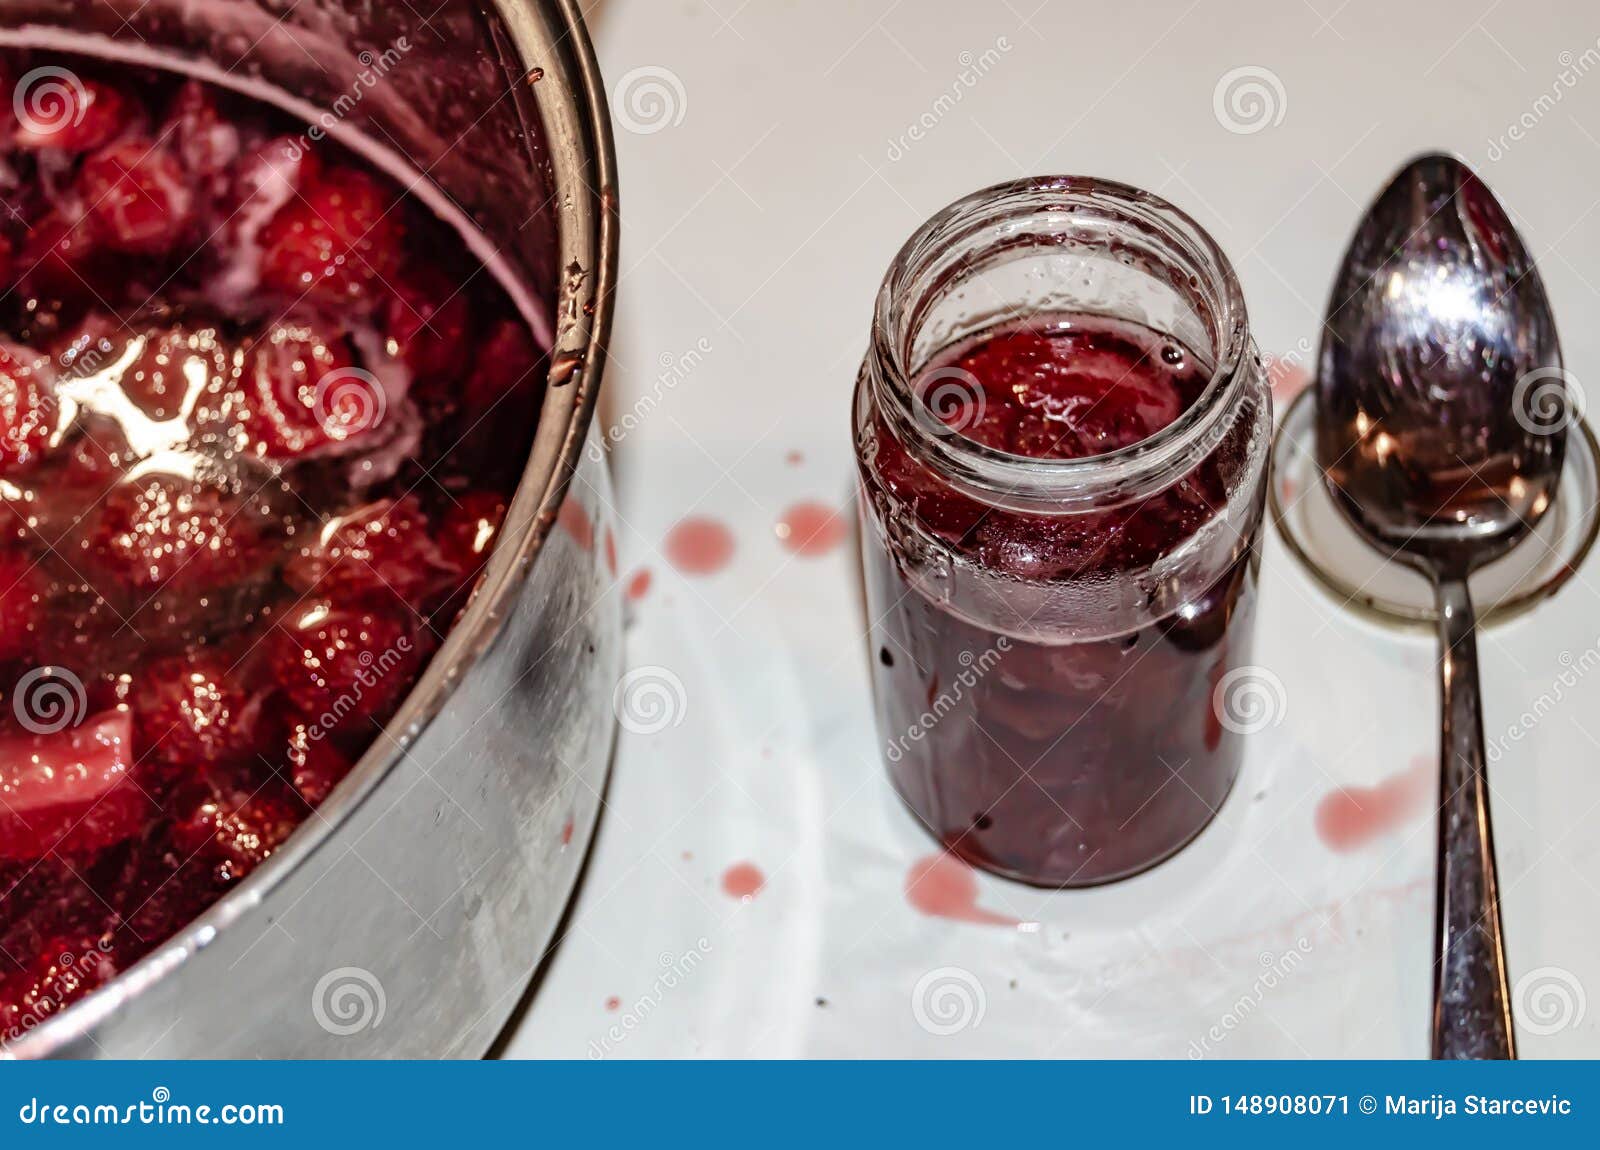 putting cooked strawberyes in the glass jars - shugar adiction